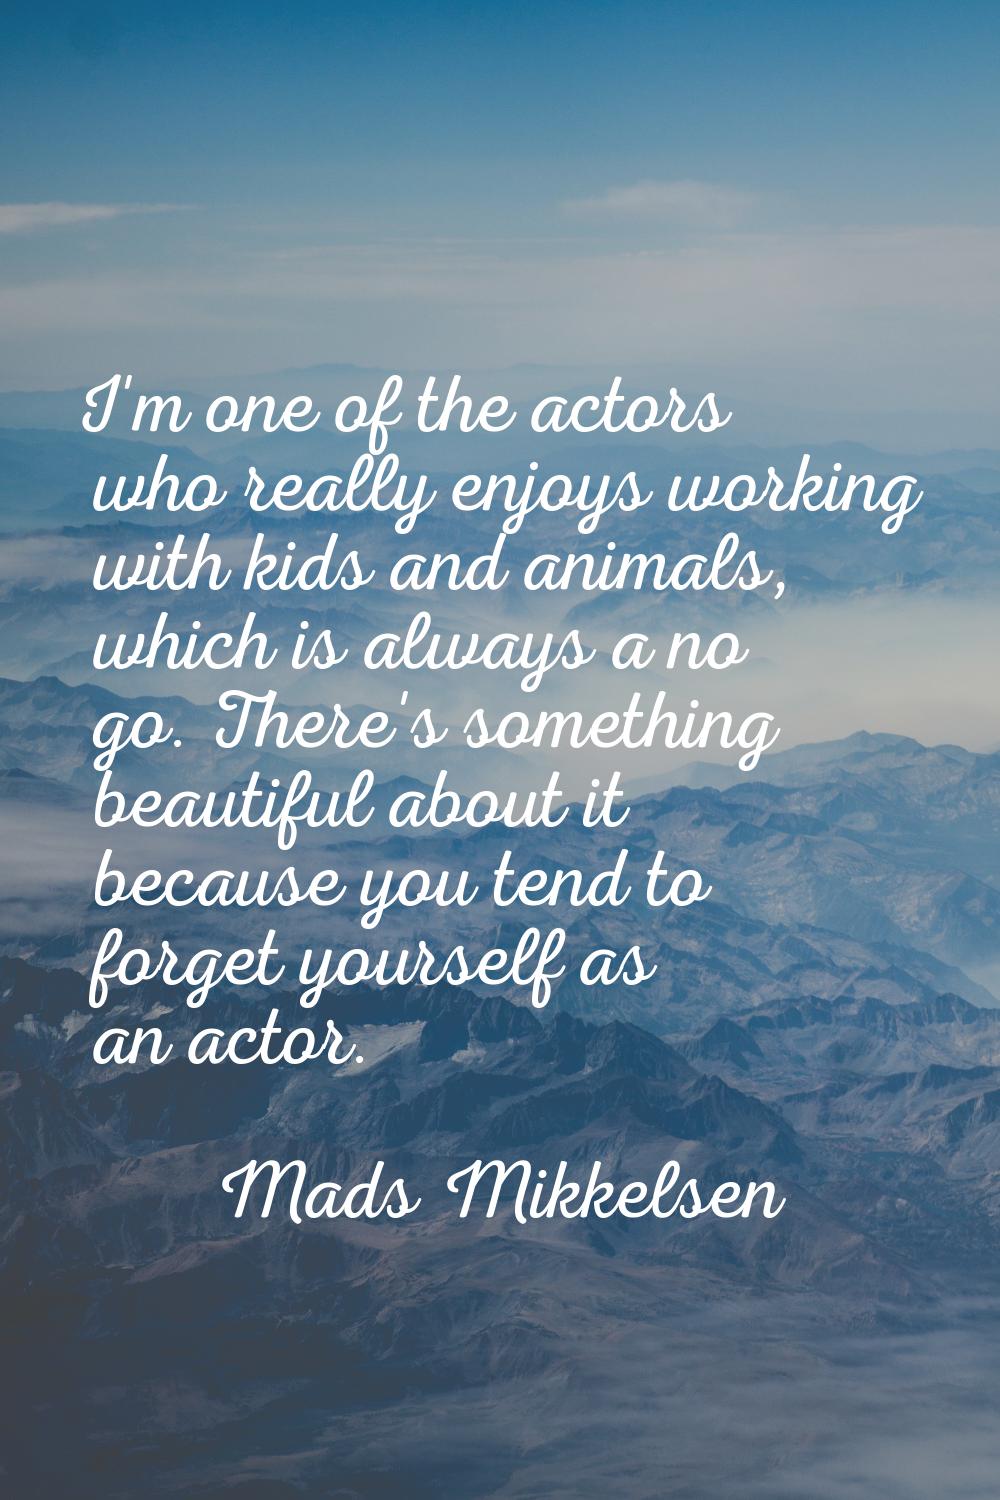 I'm one of the actors who really enjoys working with kids and animals, which is always a no go. The